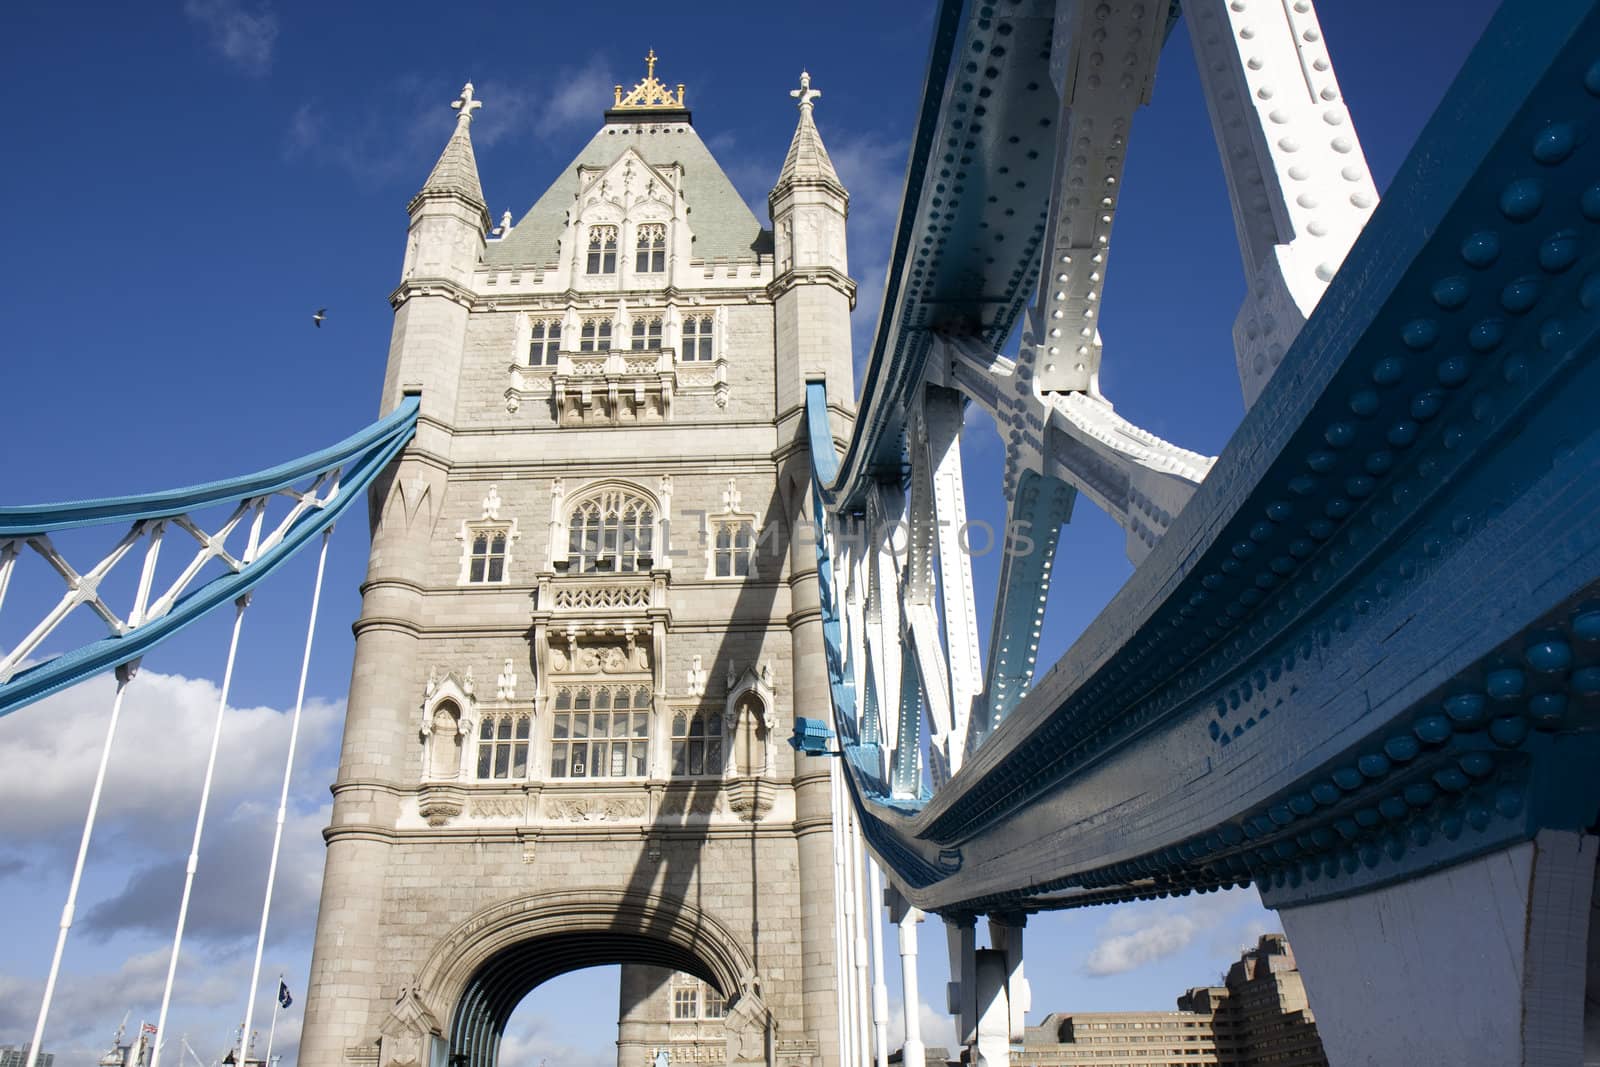 Close up detail of one of the blue supports and tower of Tower Bridge, London England